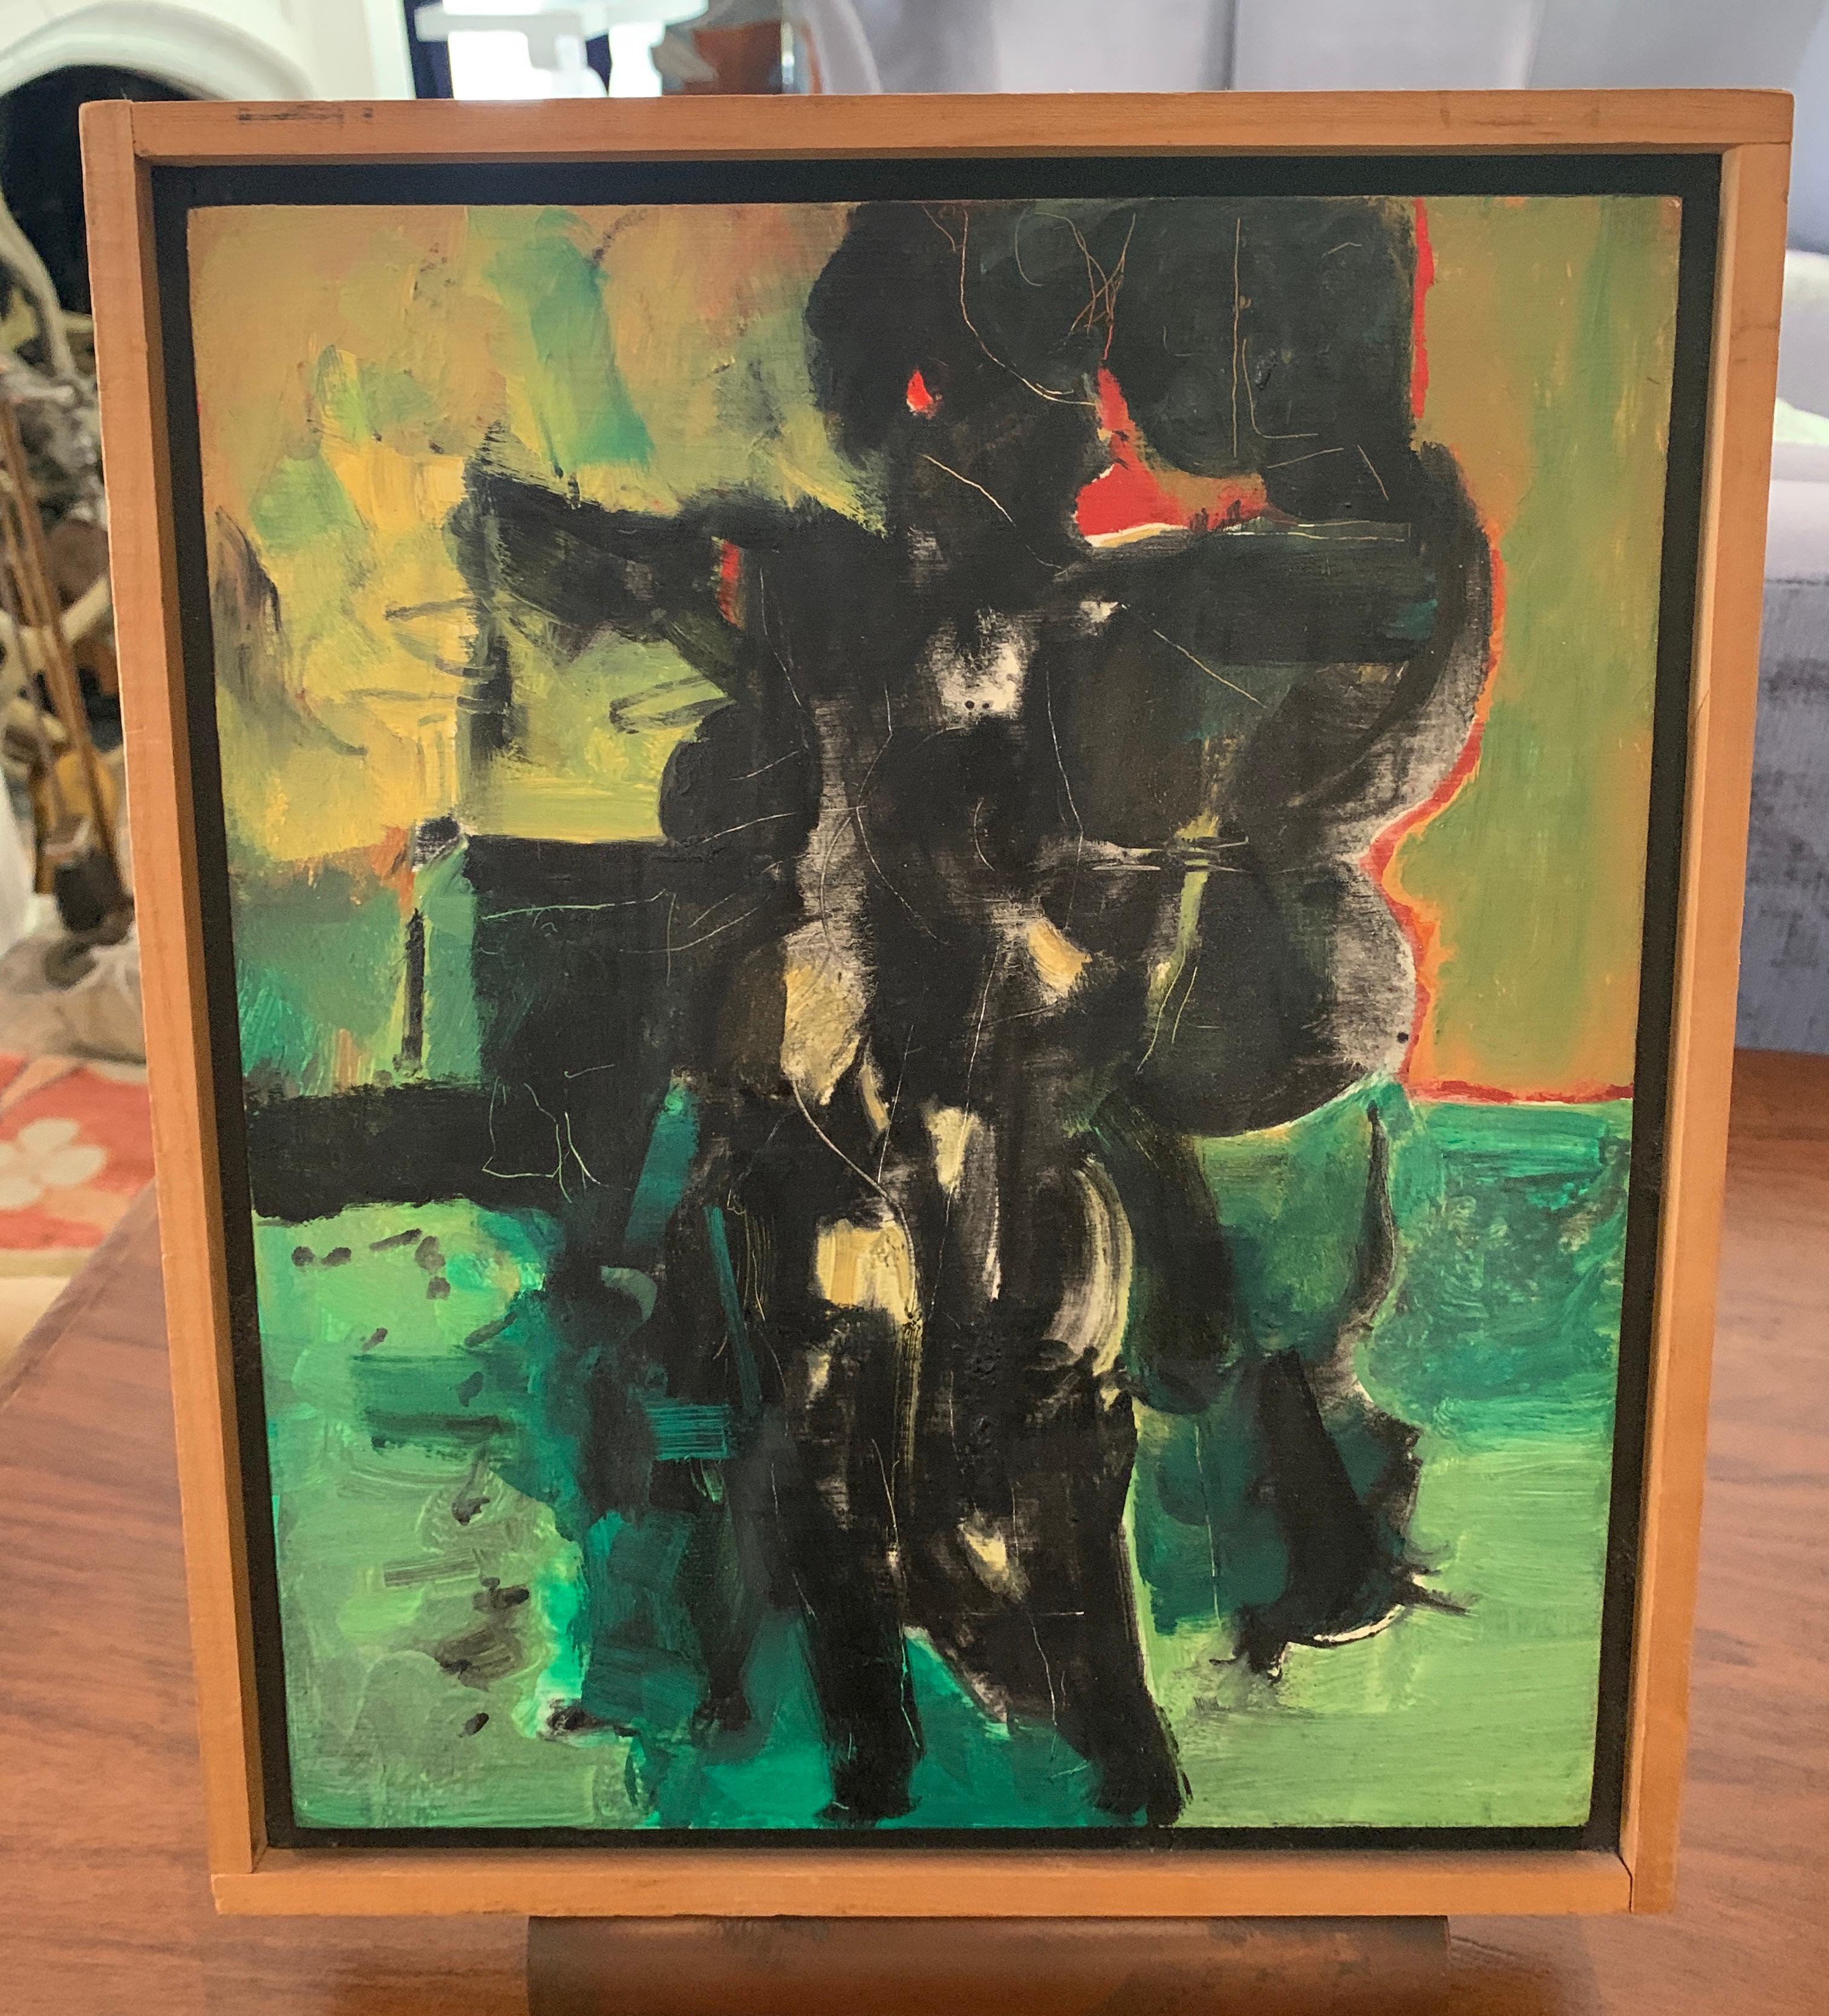 Oil on Gesso painting by Edgar L. Ewing, painted 1957, titled ICON

Born in Hartington, Nebraska on January 17, 1913, Edgar L Ewing first studied at the Art Institute of Chicago under Boris Anisfeld. Upon graduation in 1935, he further studied and